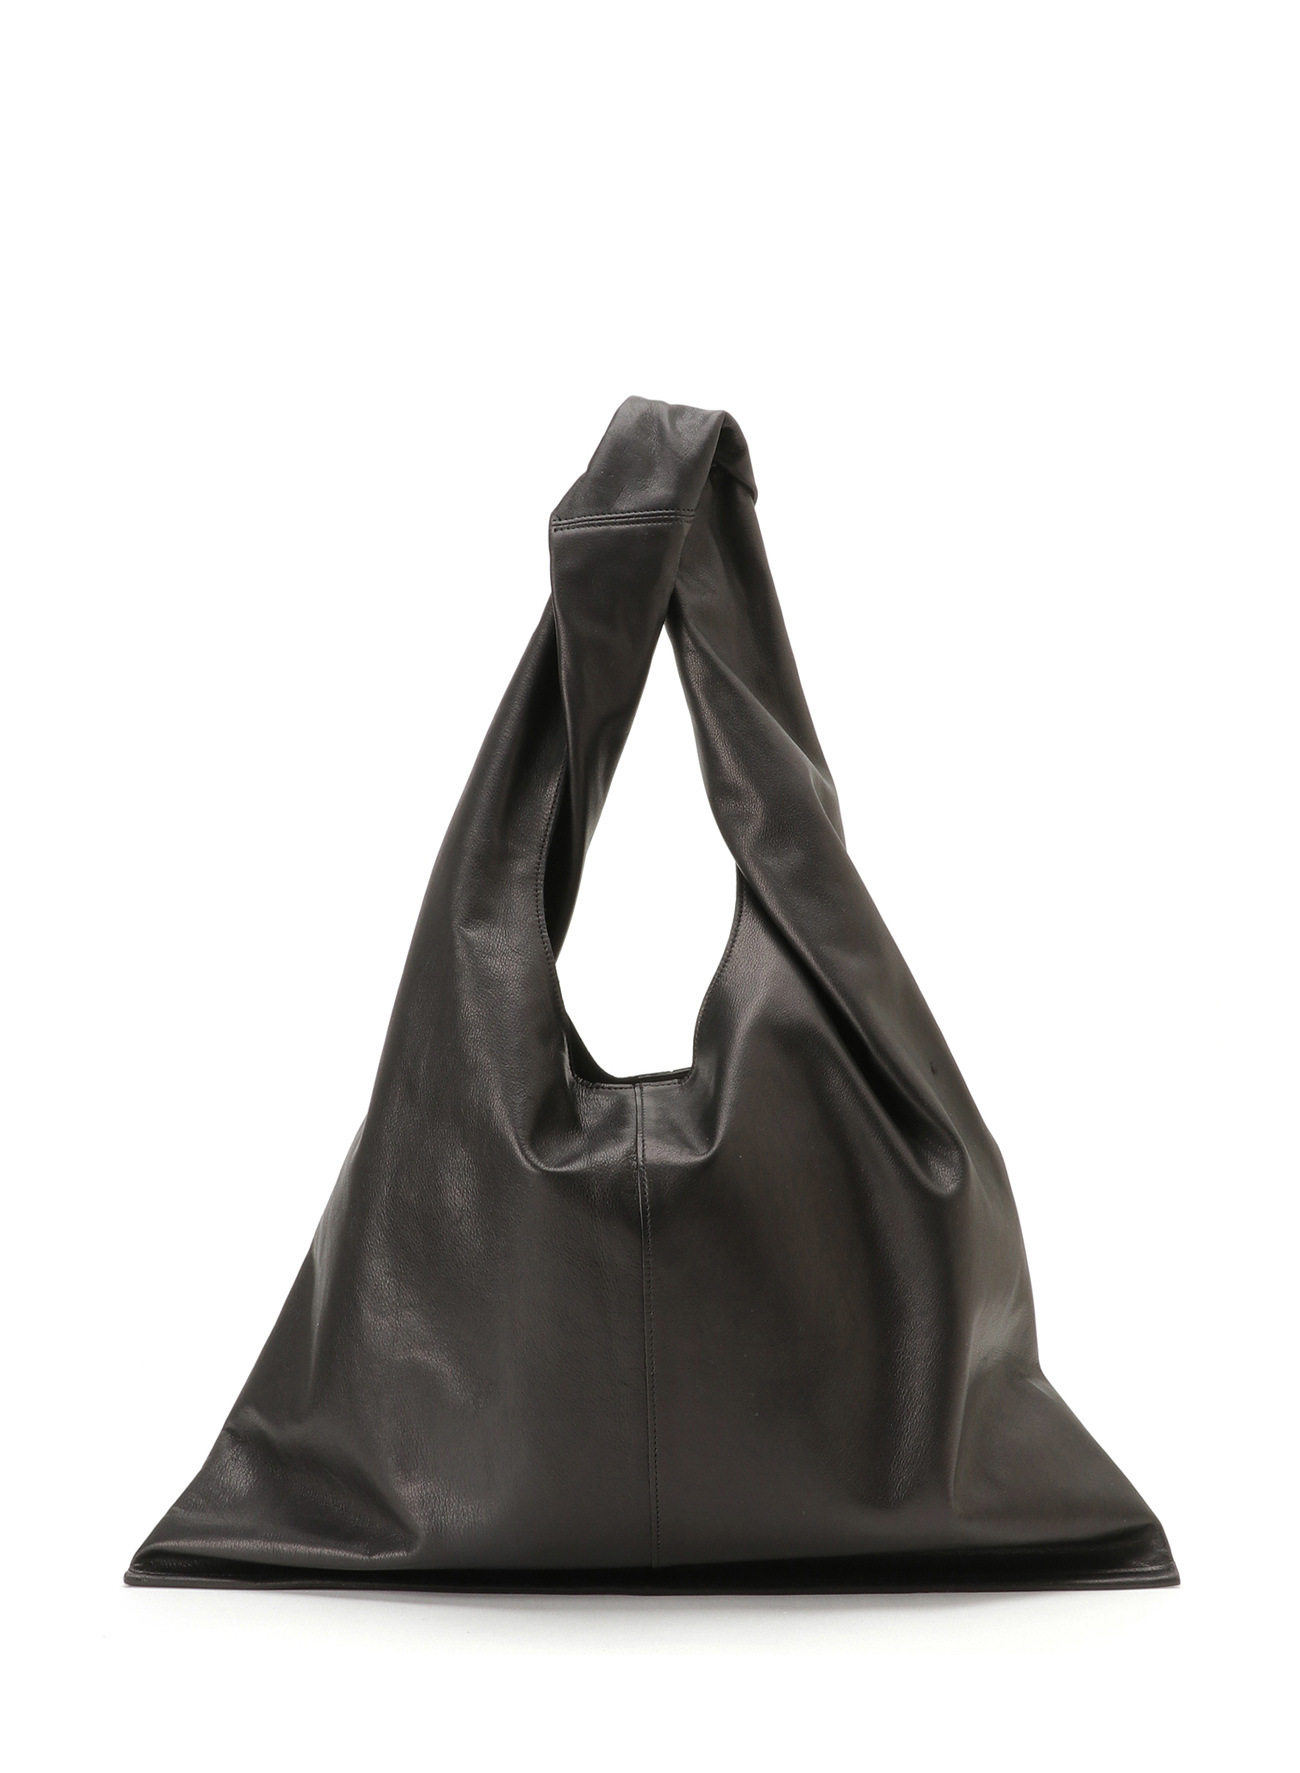 SOFT OIL LEATHER TWISTED TOTE L